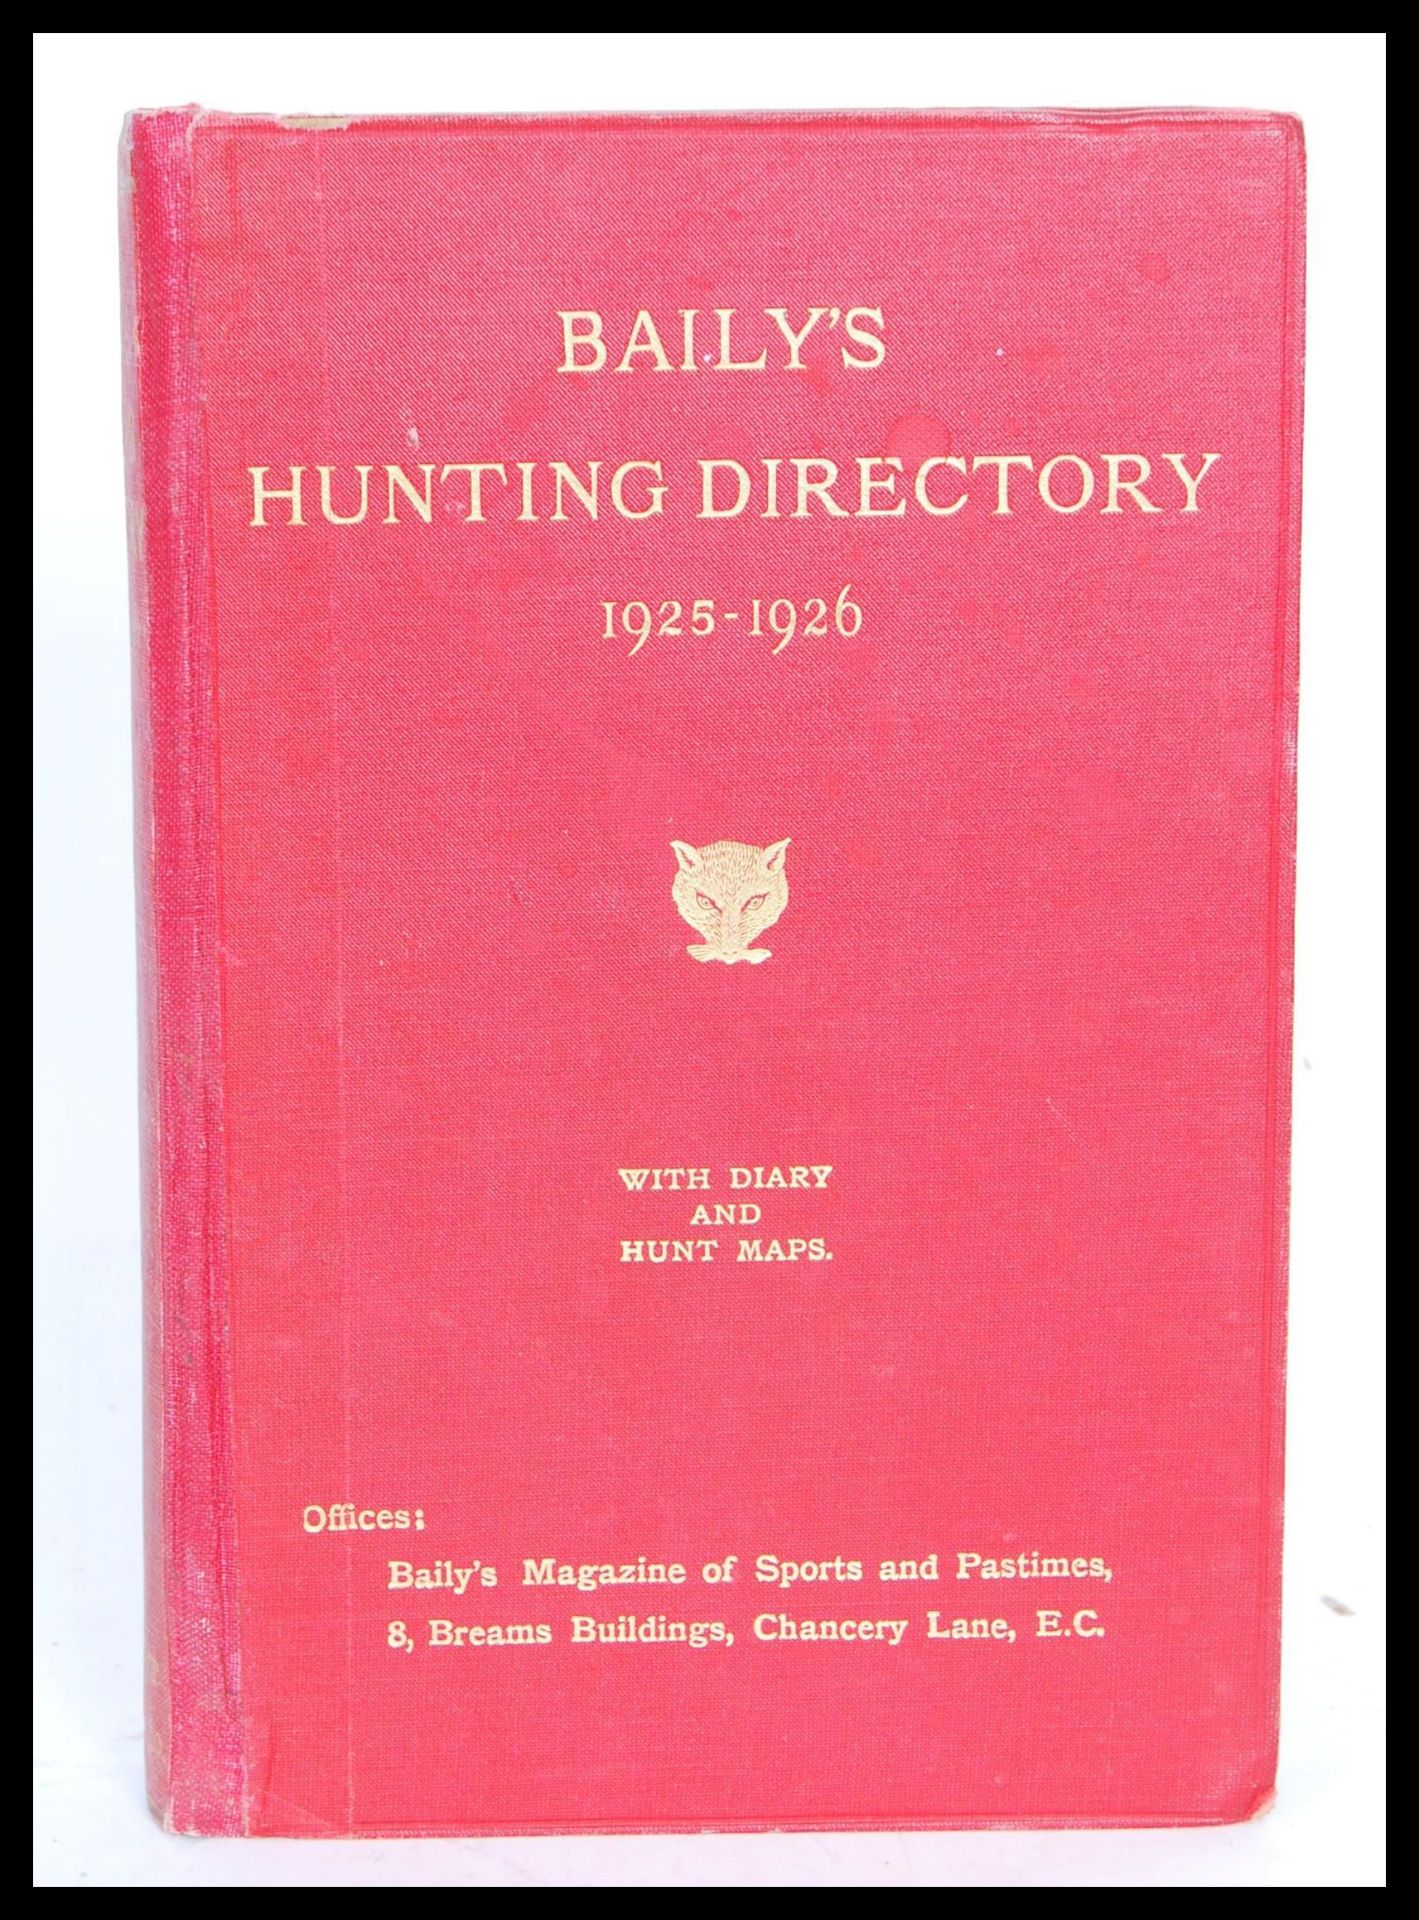 Hunting Interest - Baily's Hunting Directory 1925-26 With Diary and Hunt Maps published by